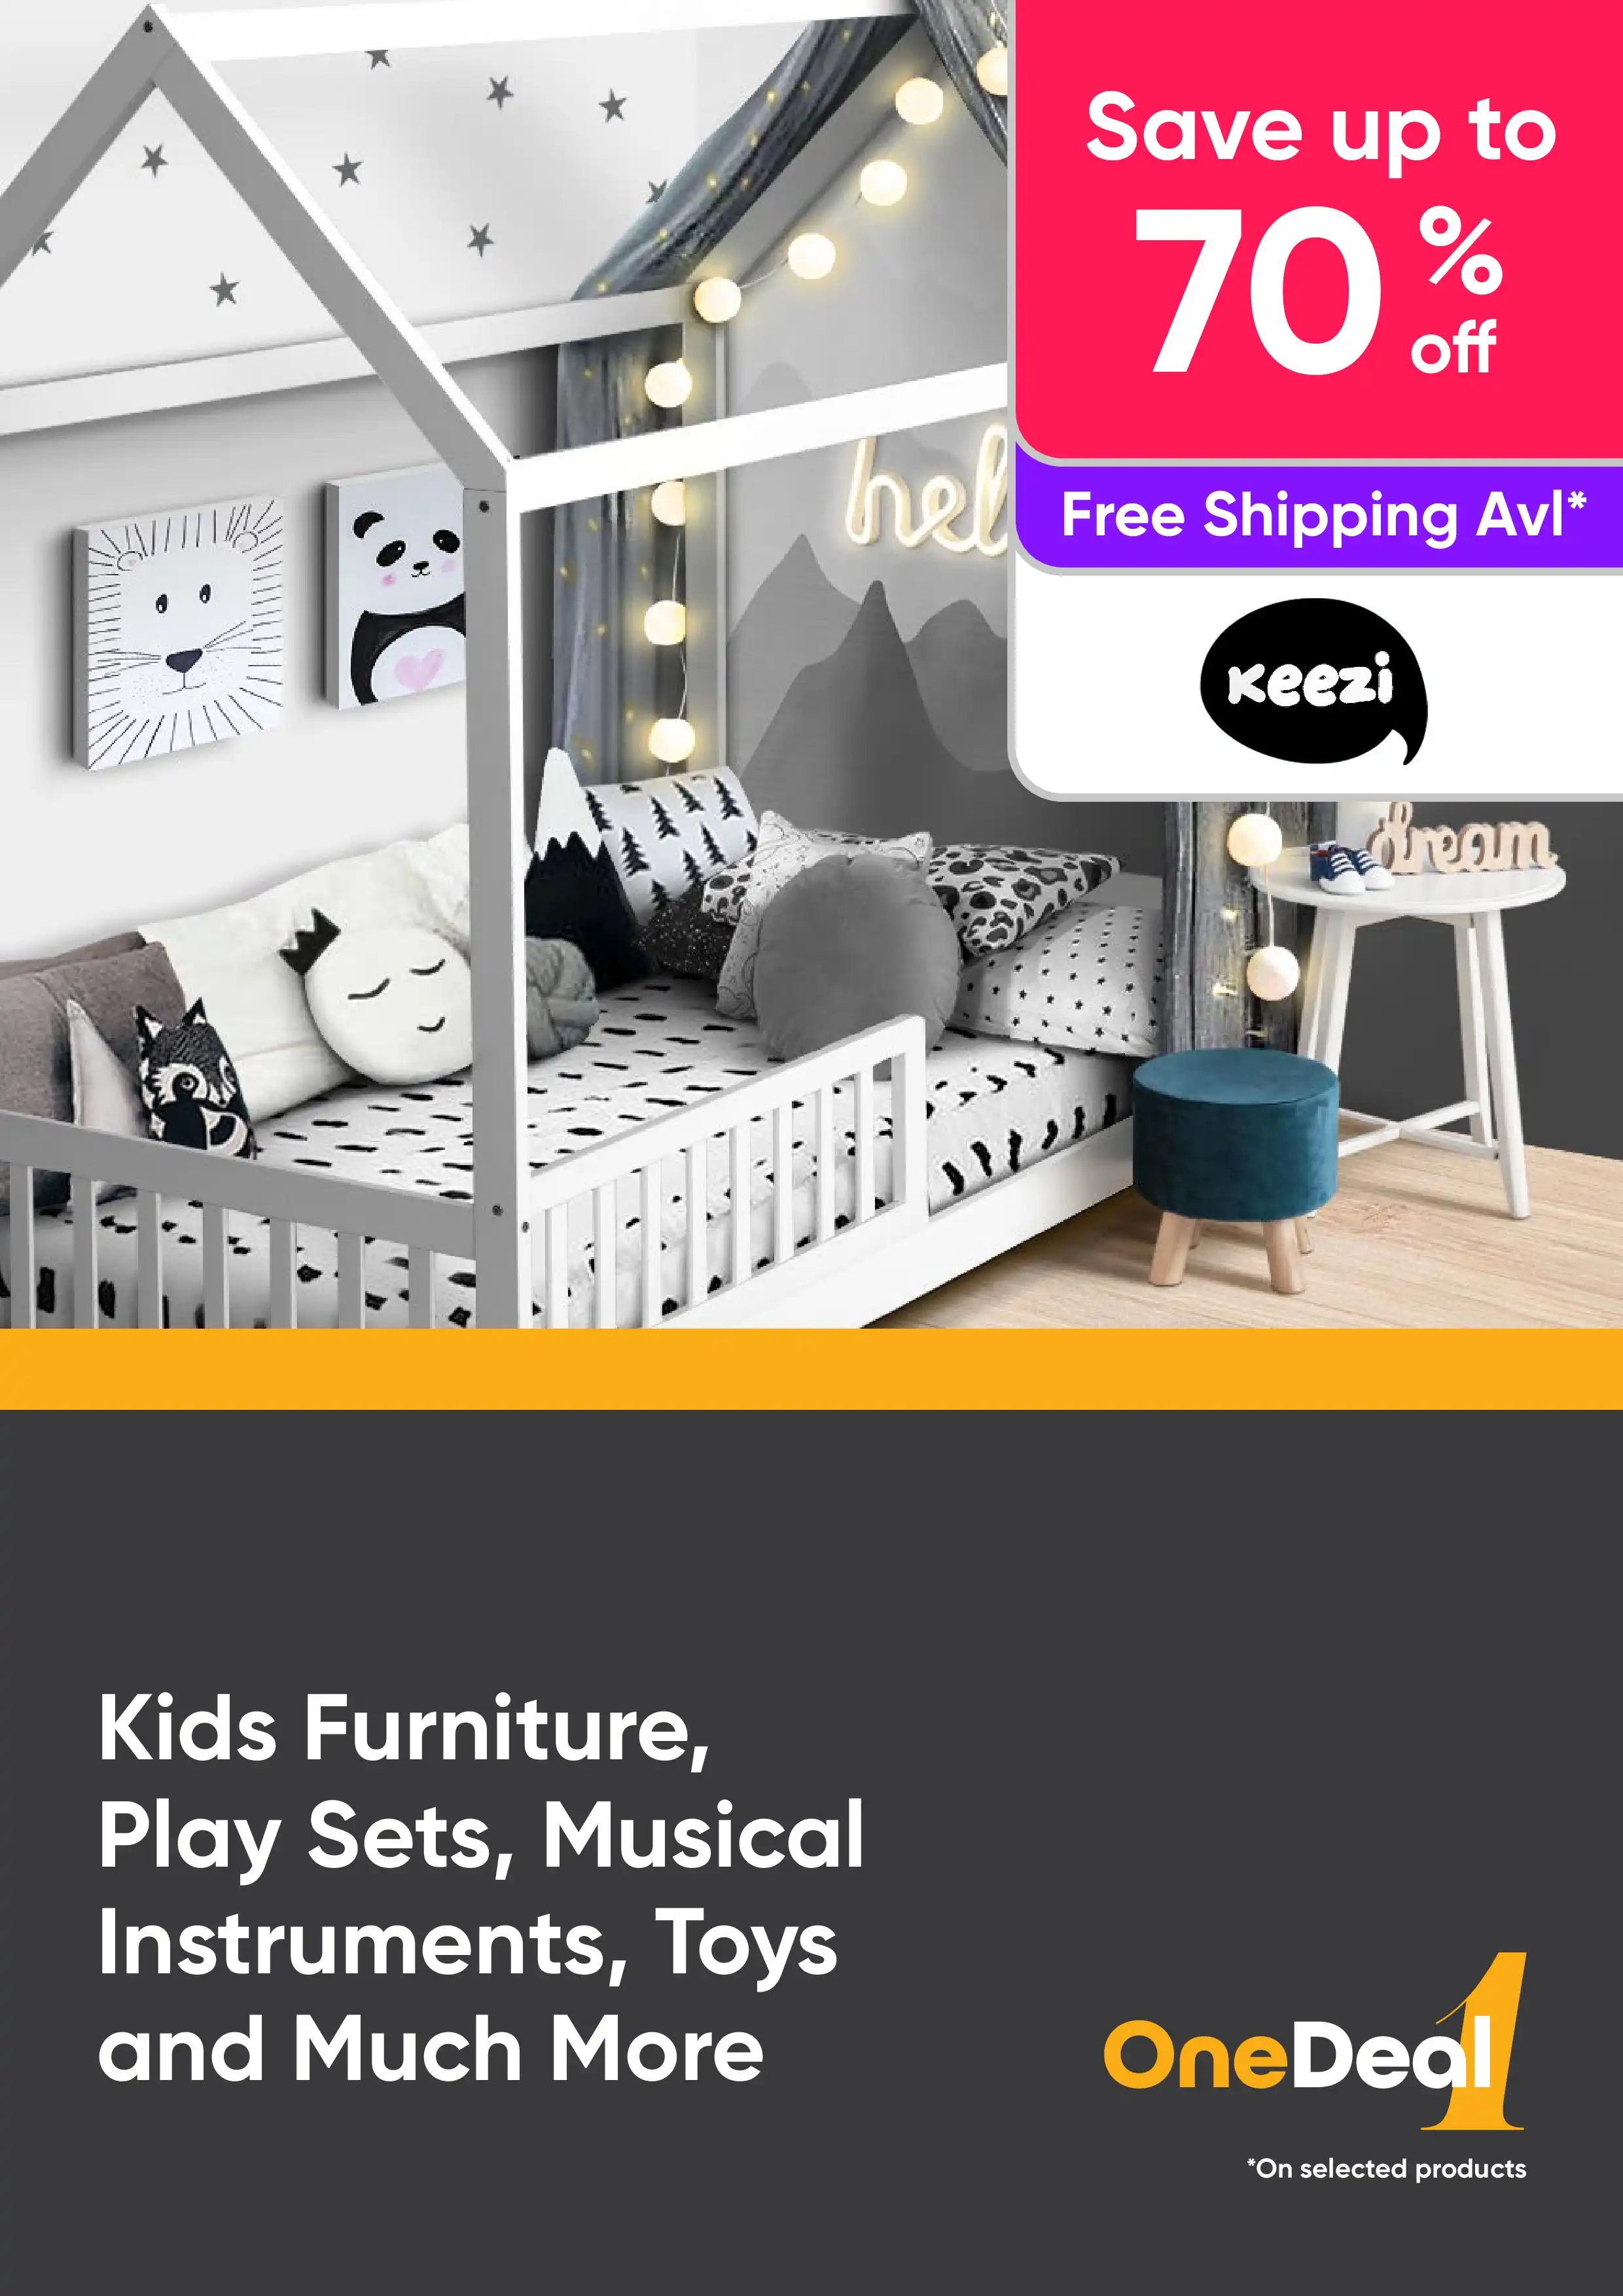 Shop Deals on Kids Furniture, Play Sets, Musical Instruments, Toys and More - Save up to 70% Off